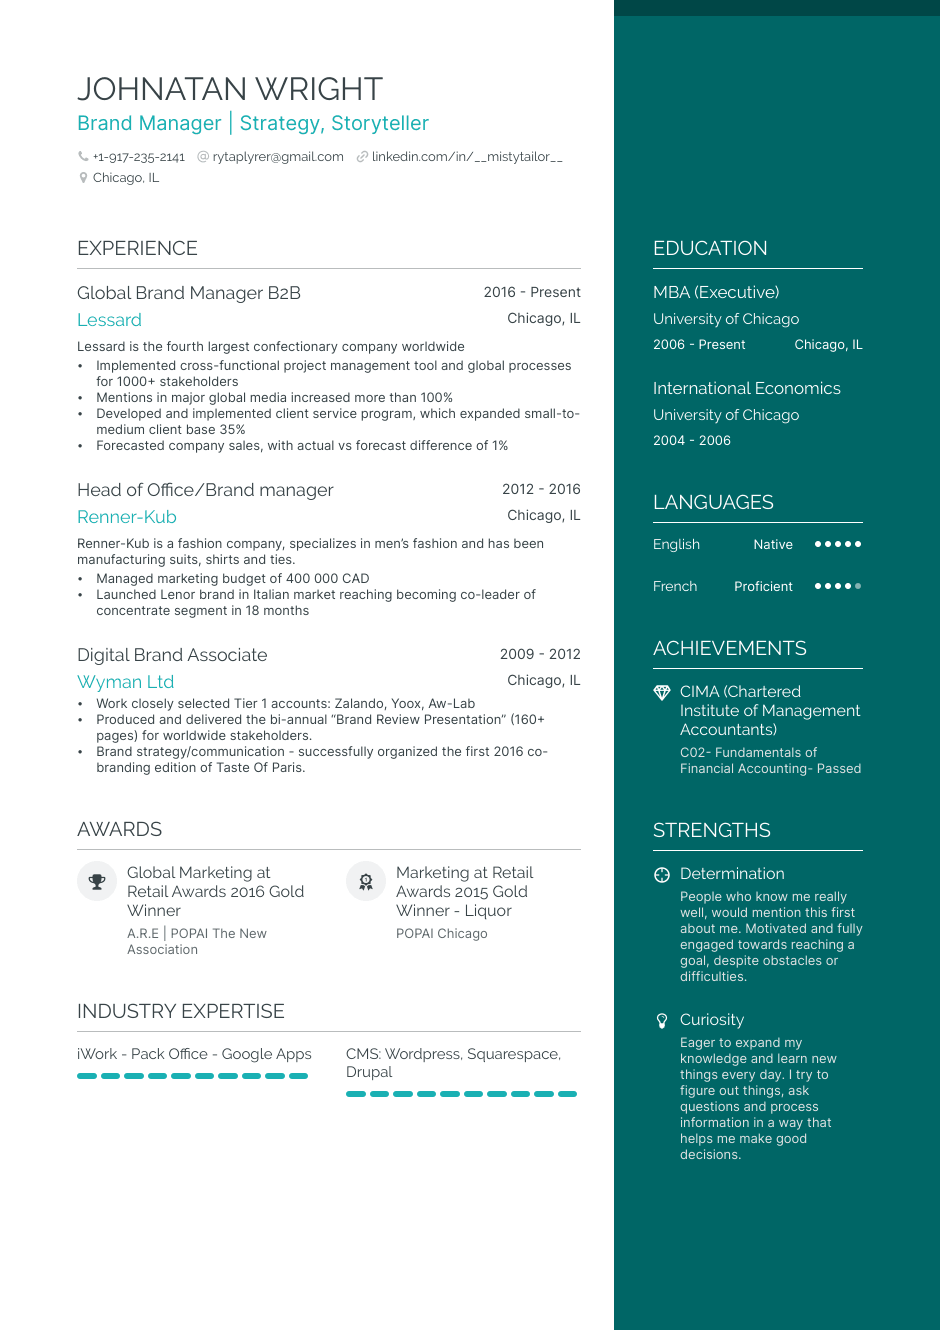 Brand Manager resume example